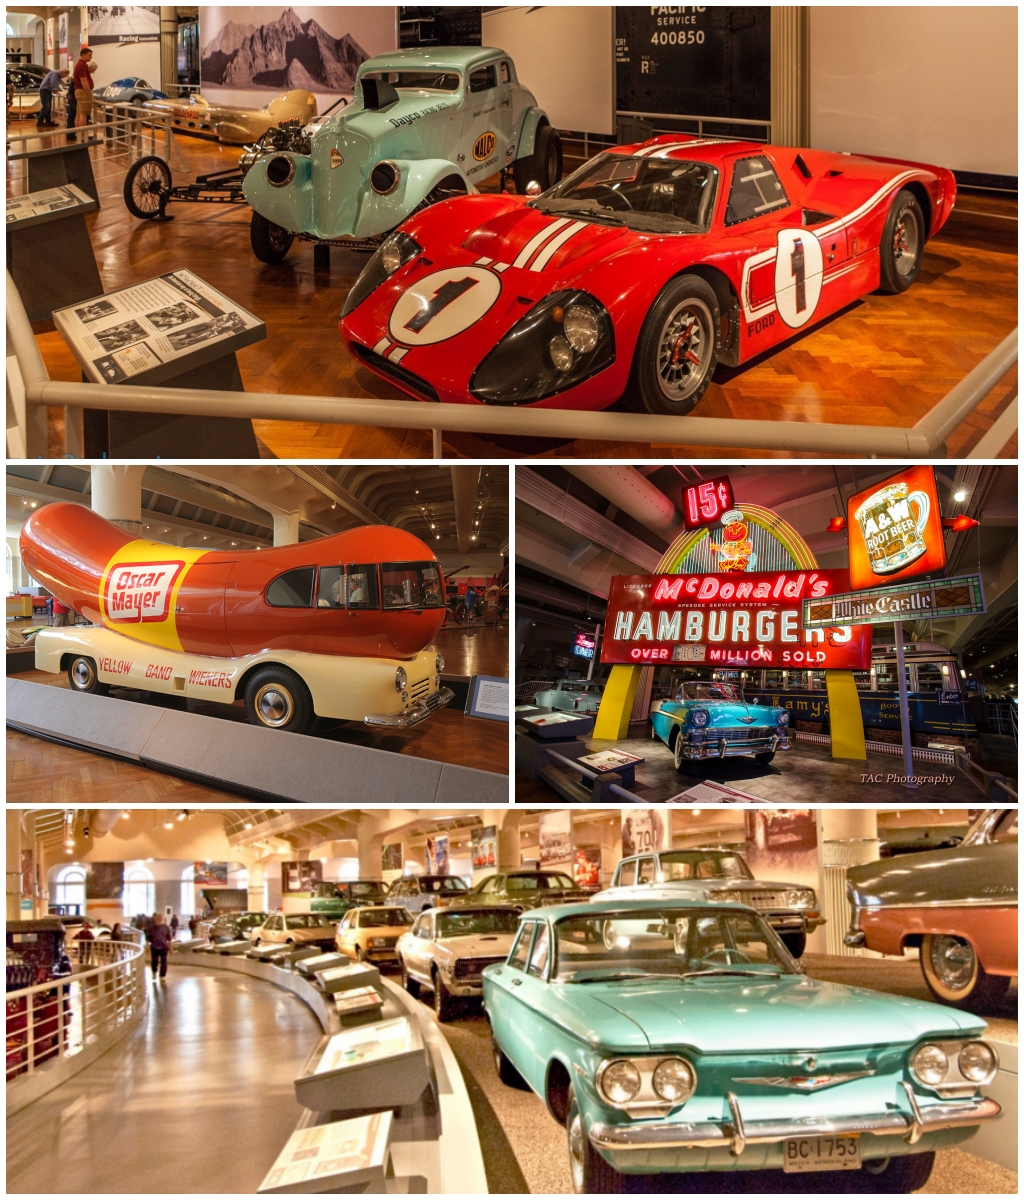 The Henry Ford Museum
